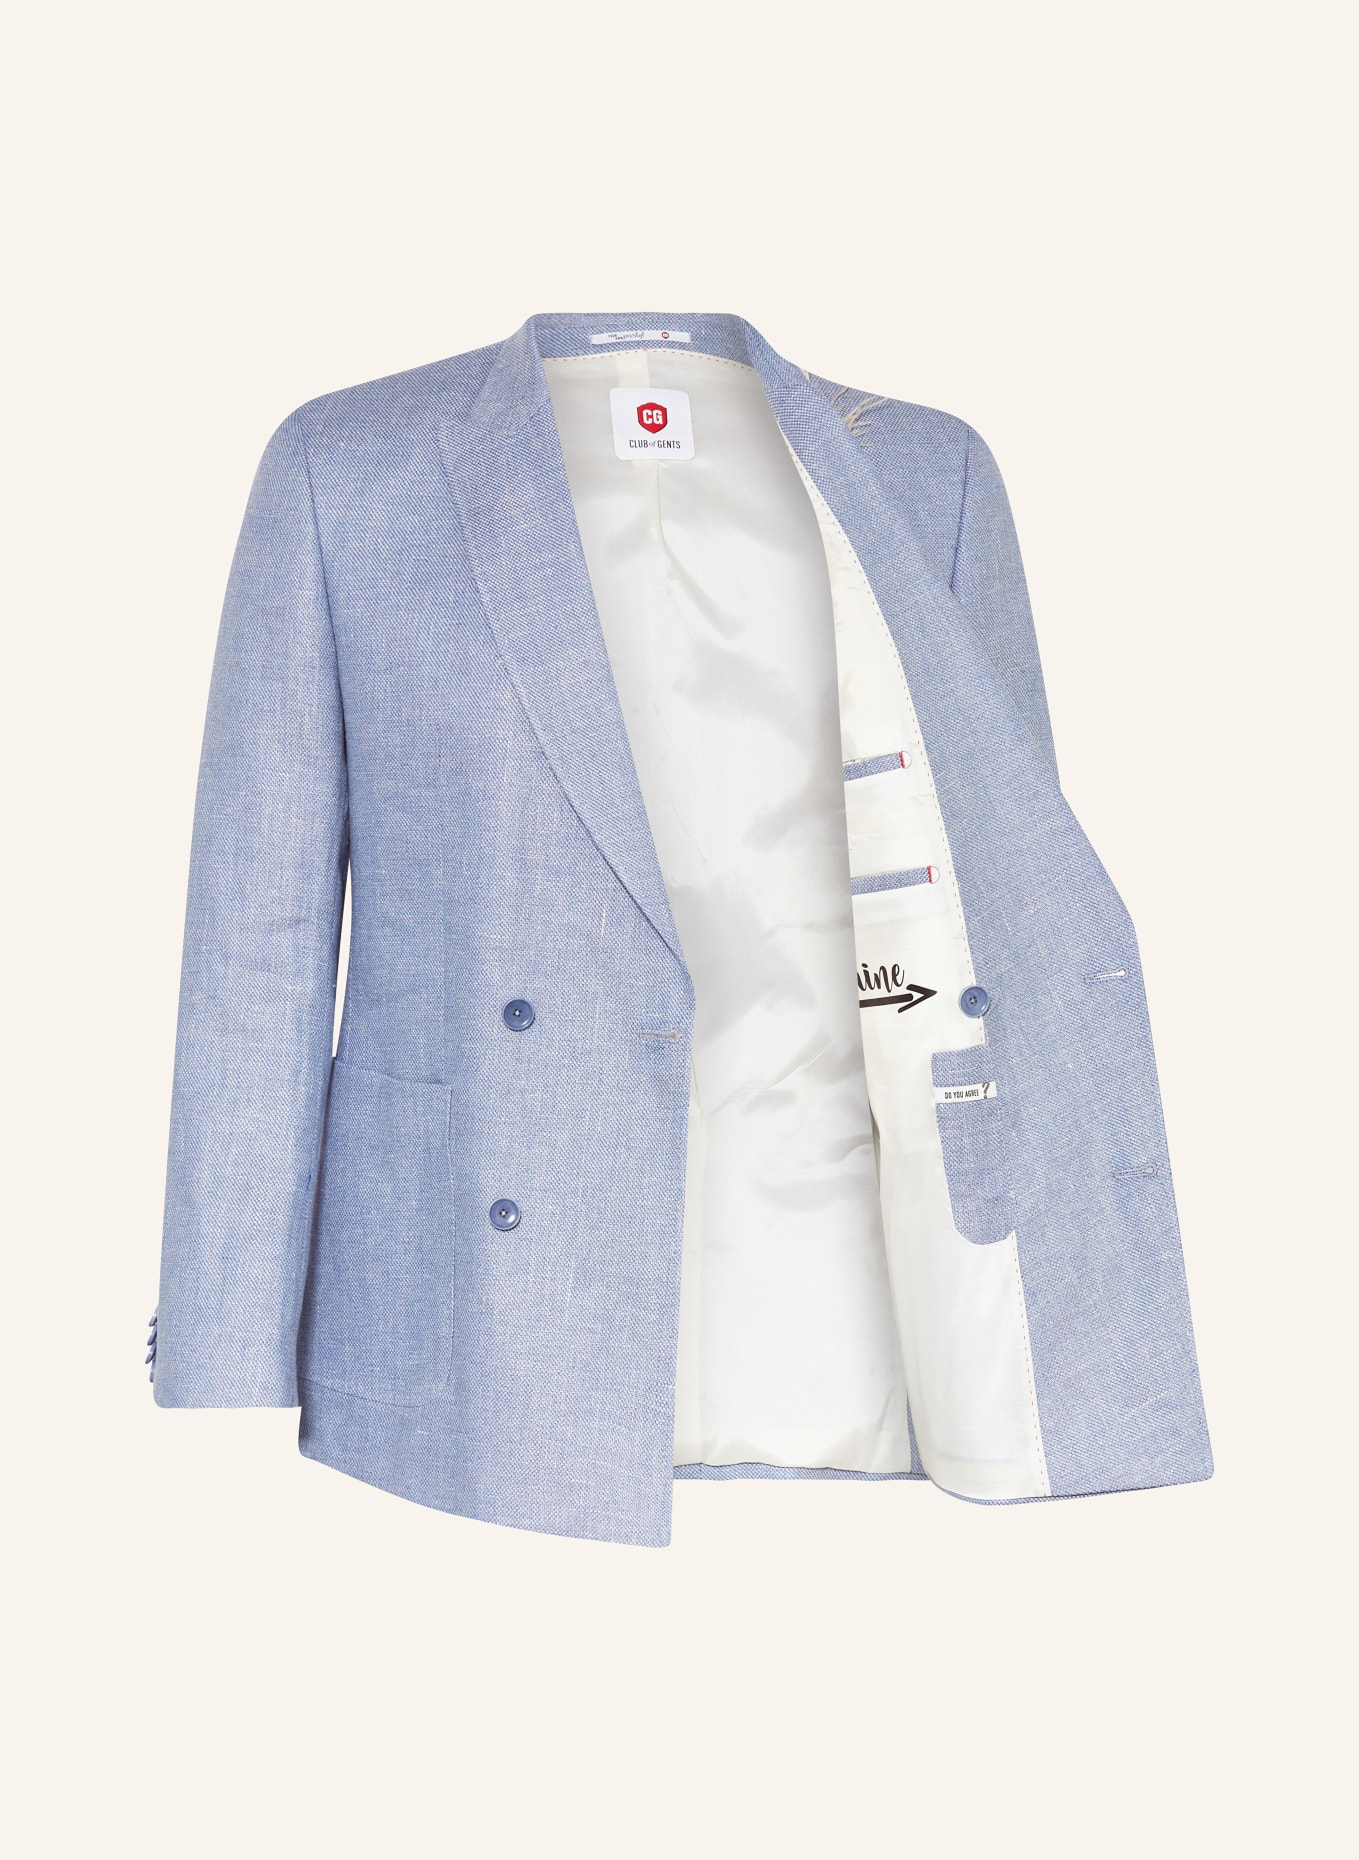 CG - CLUB of GENTS Suit jacket CG PERO slim fit with linen, Color: 61 BLAU HELL (Image 4)